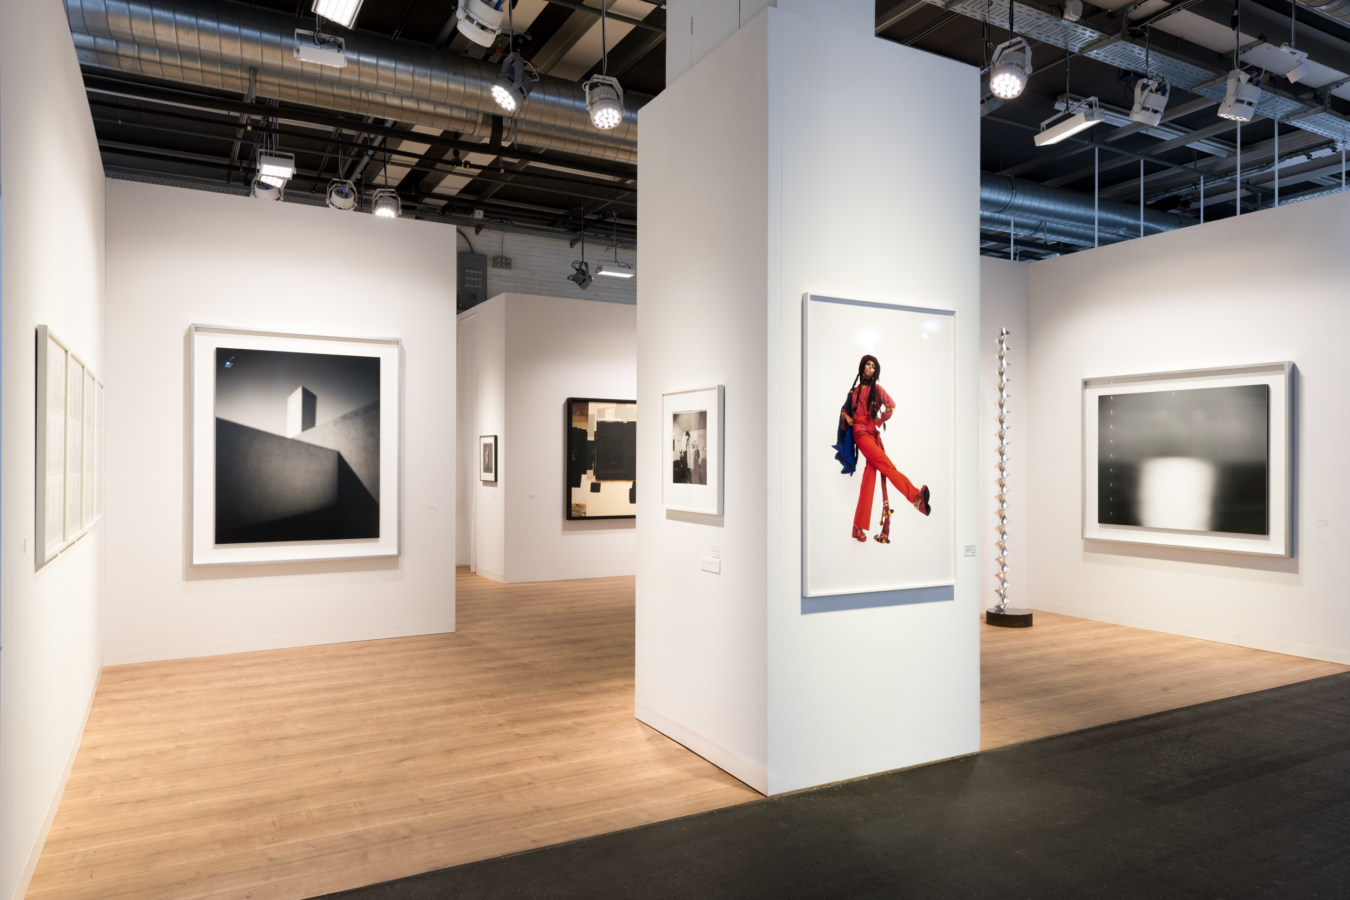 Installation view of artwork on display in an art fair booth